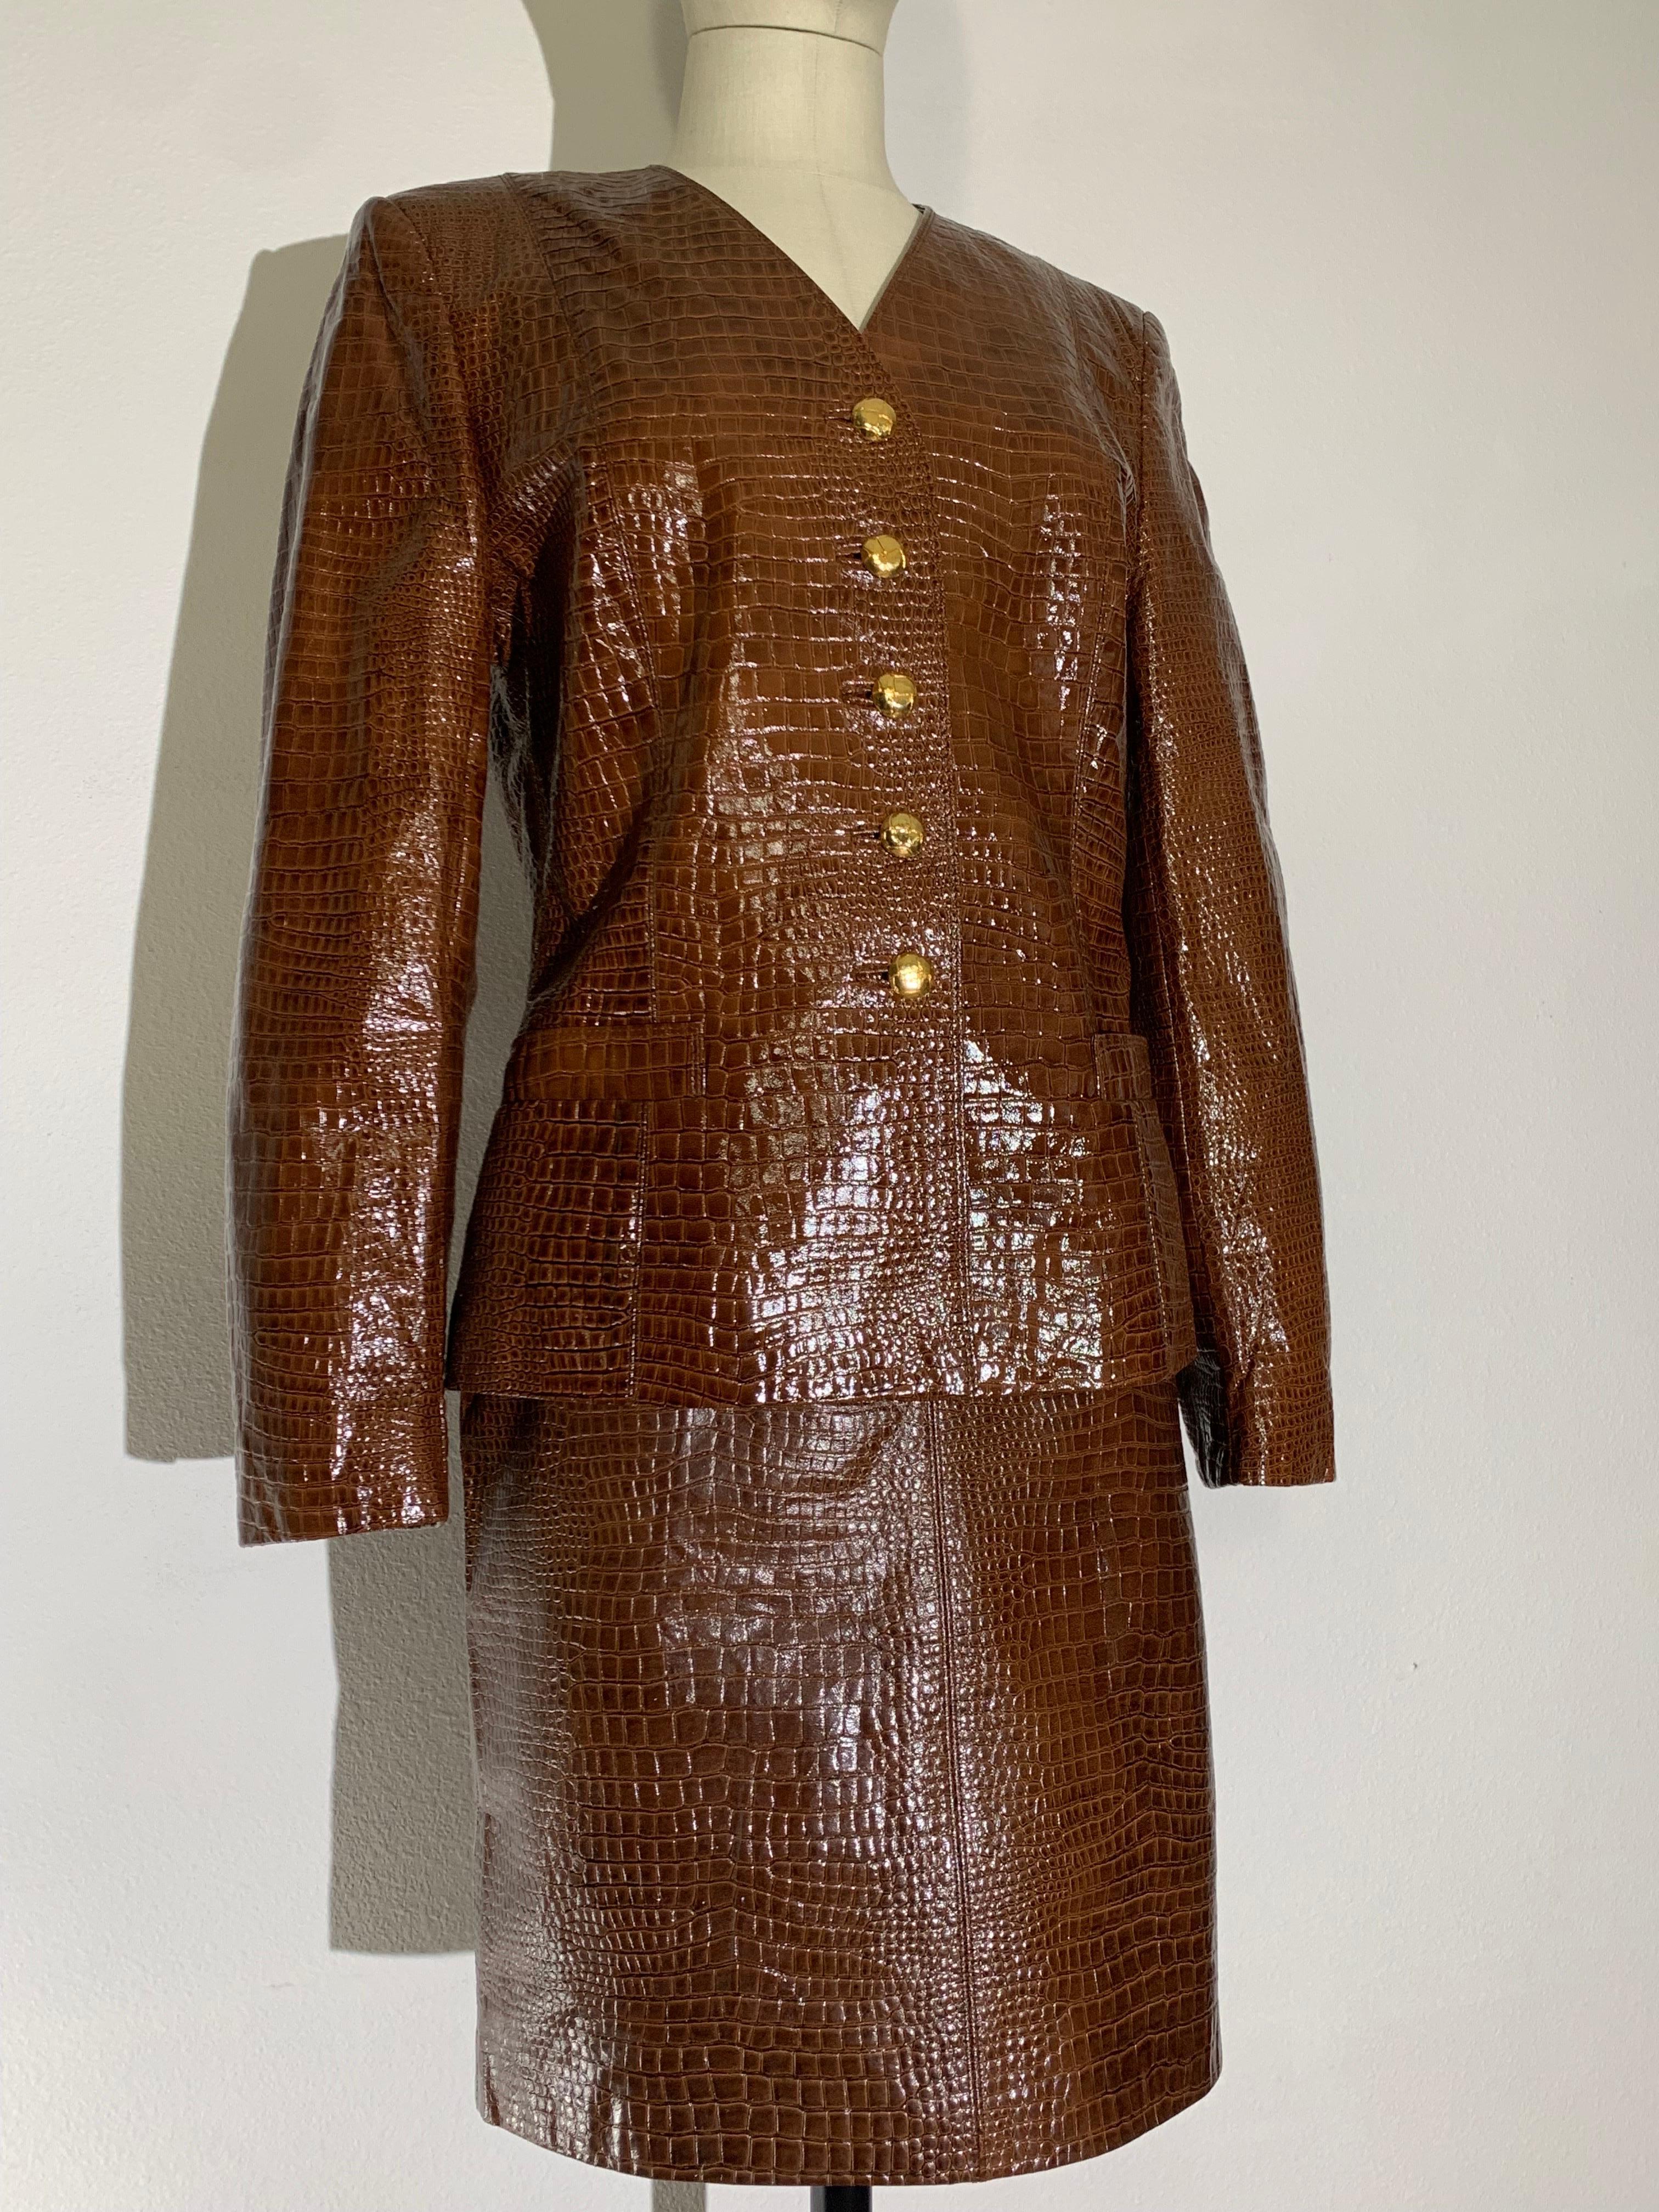 Women's 1980s Escada Brown Patent Leather Crocodile Embossed Skirt Suit w Gold Buttons For Sale